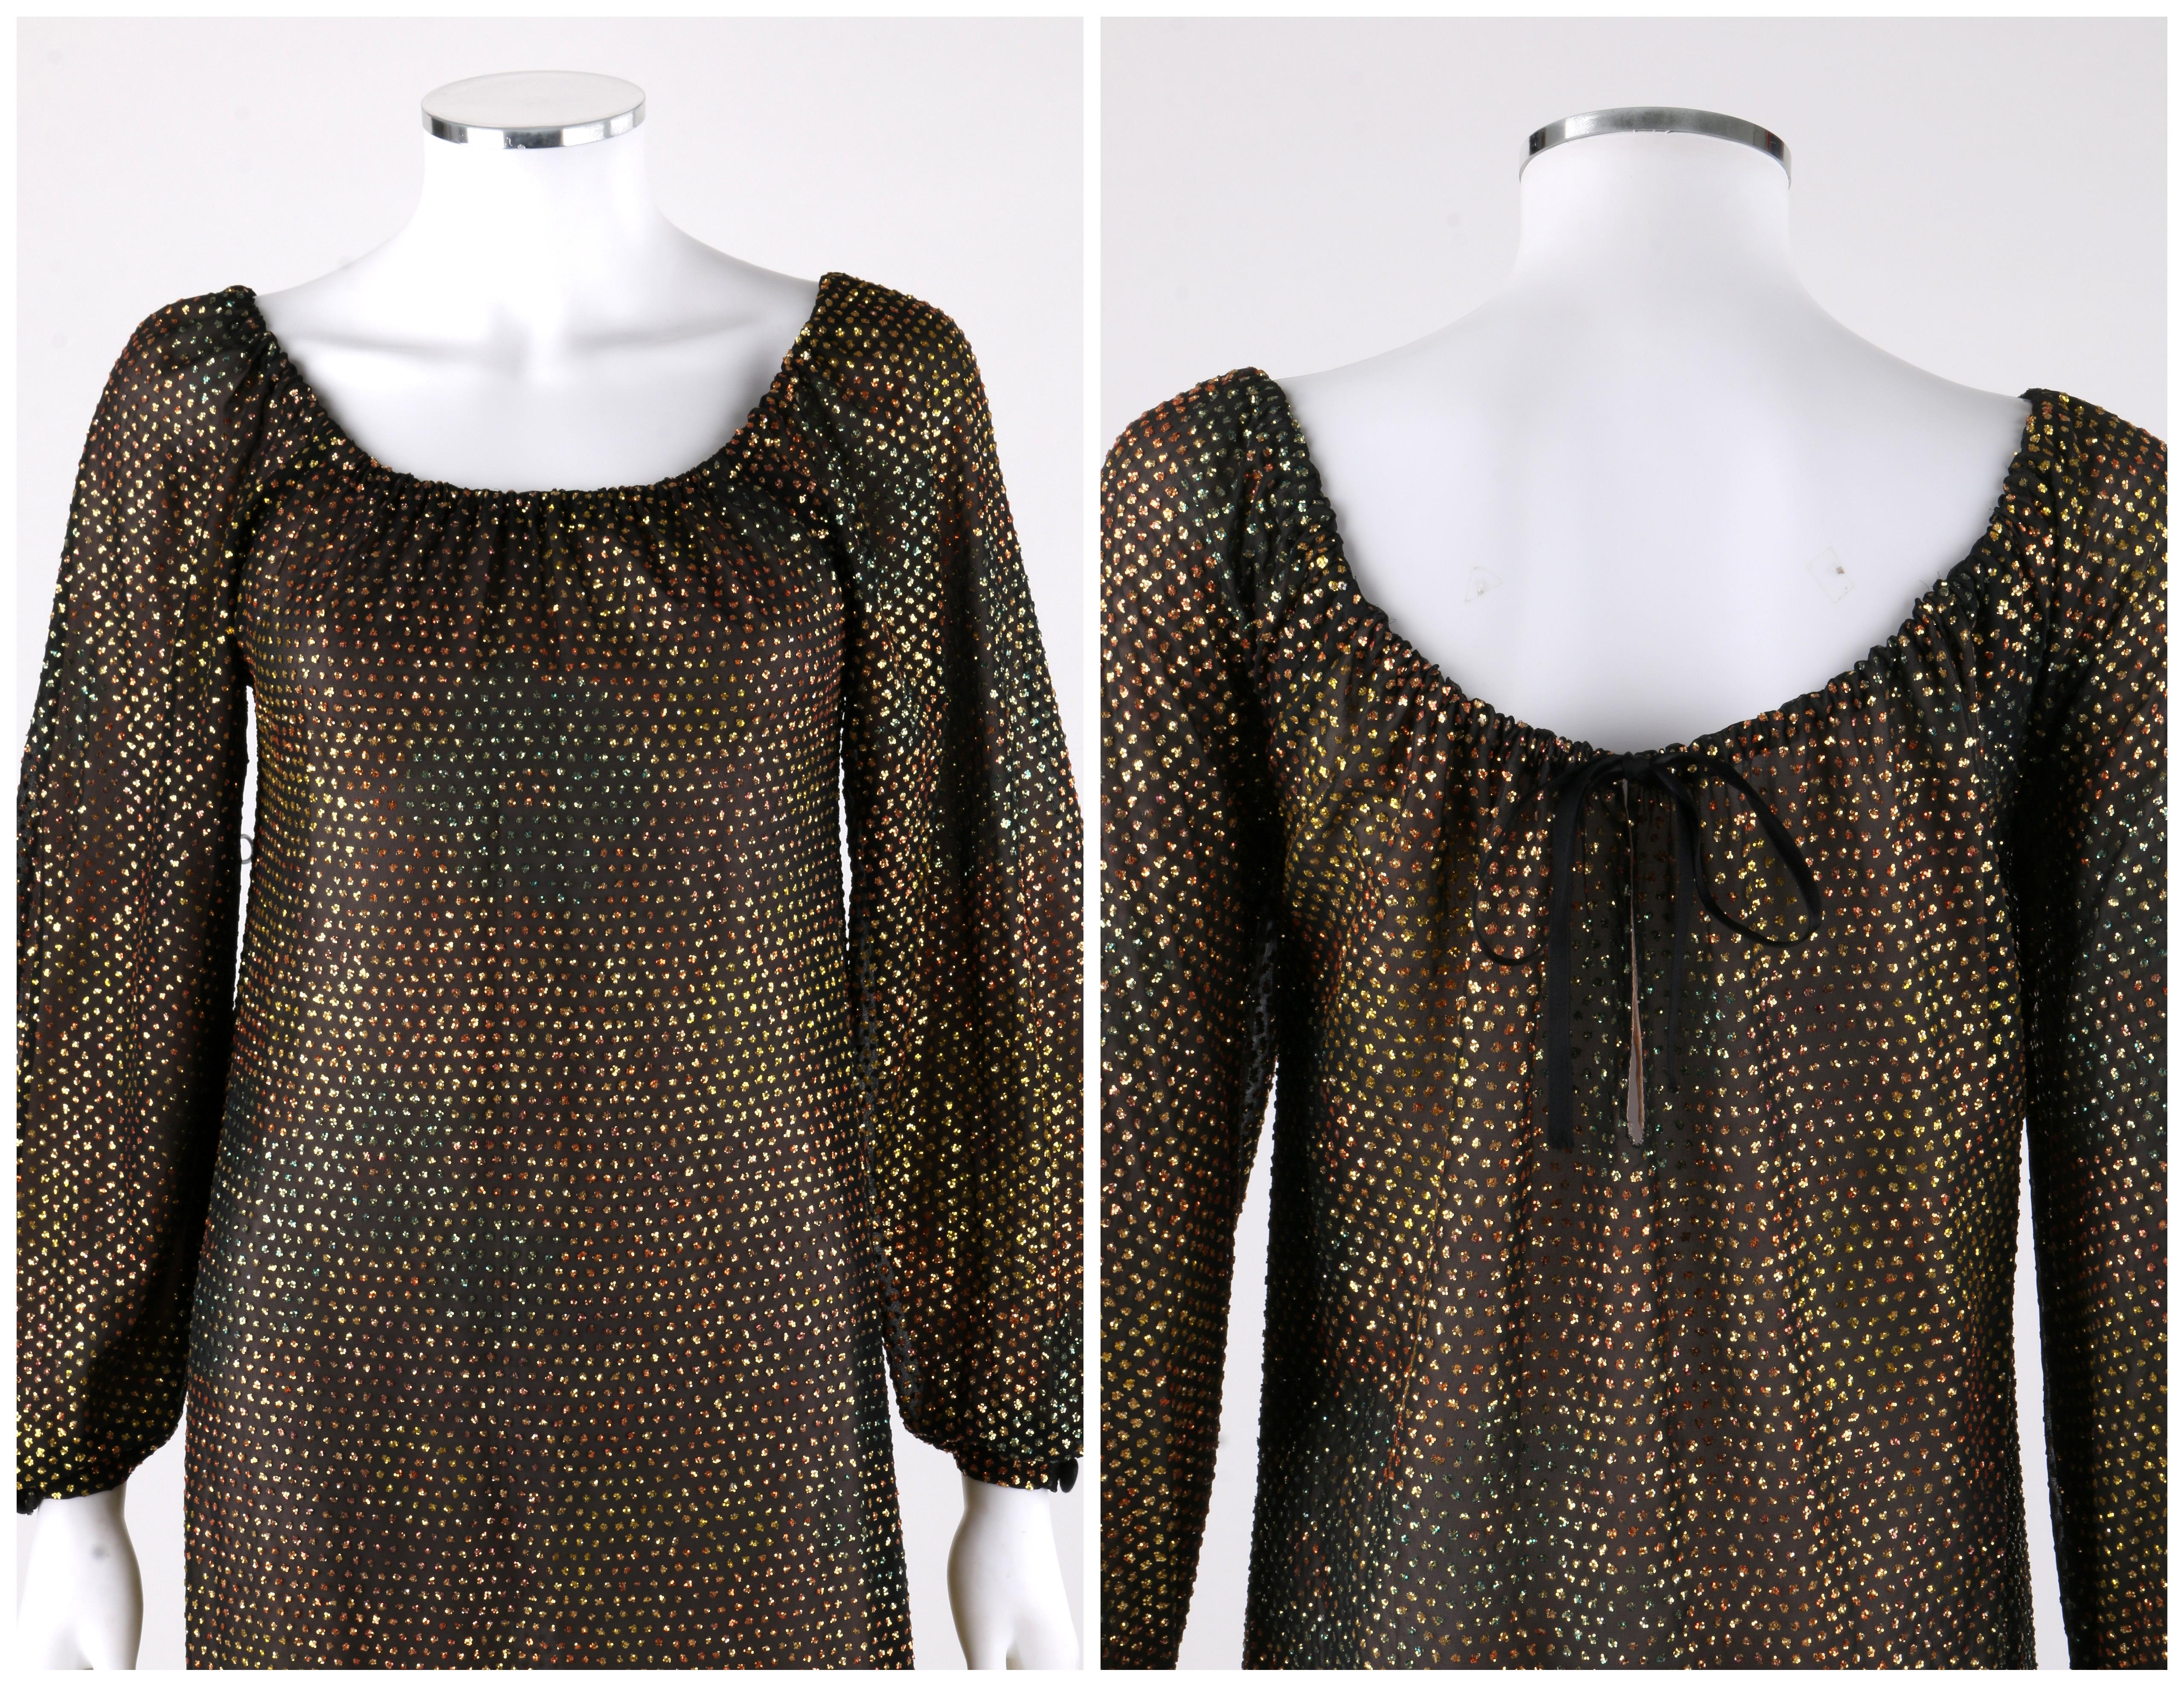 GIVENCHY HAUTE COUTURE c.1970s Black Gold-Rainbow Bishop Sleeve Shift Dress For Sale 2